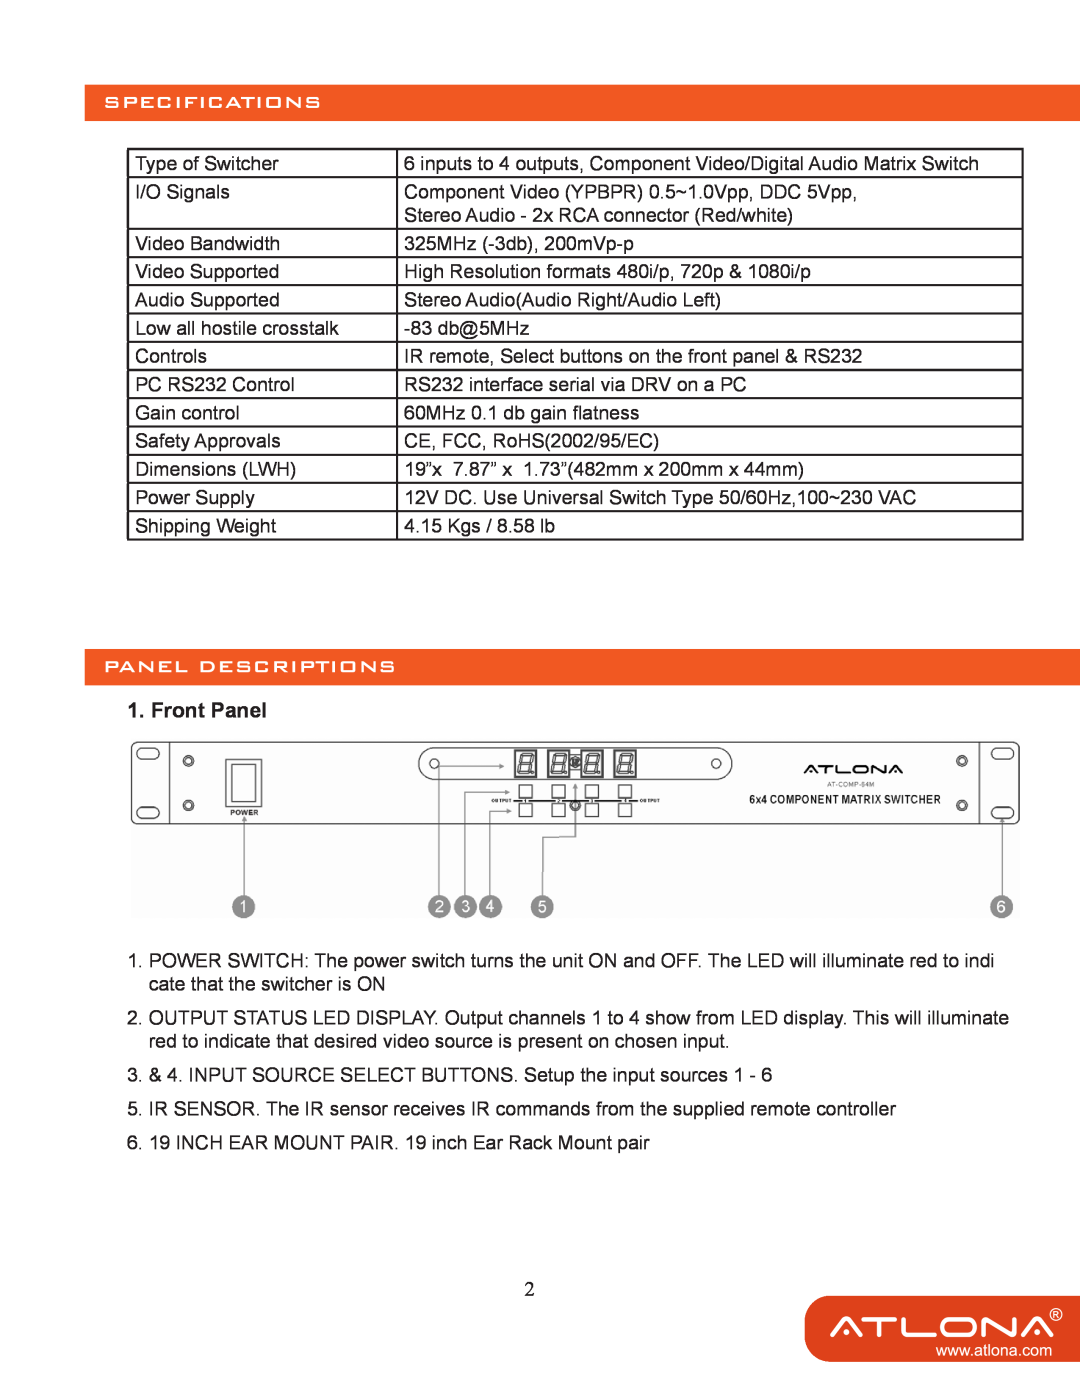 Atlona 64 M user manual Specifications, Panel Descriptions, Front Panel 